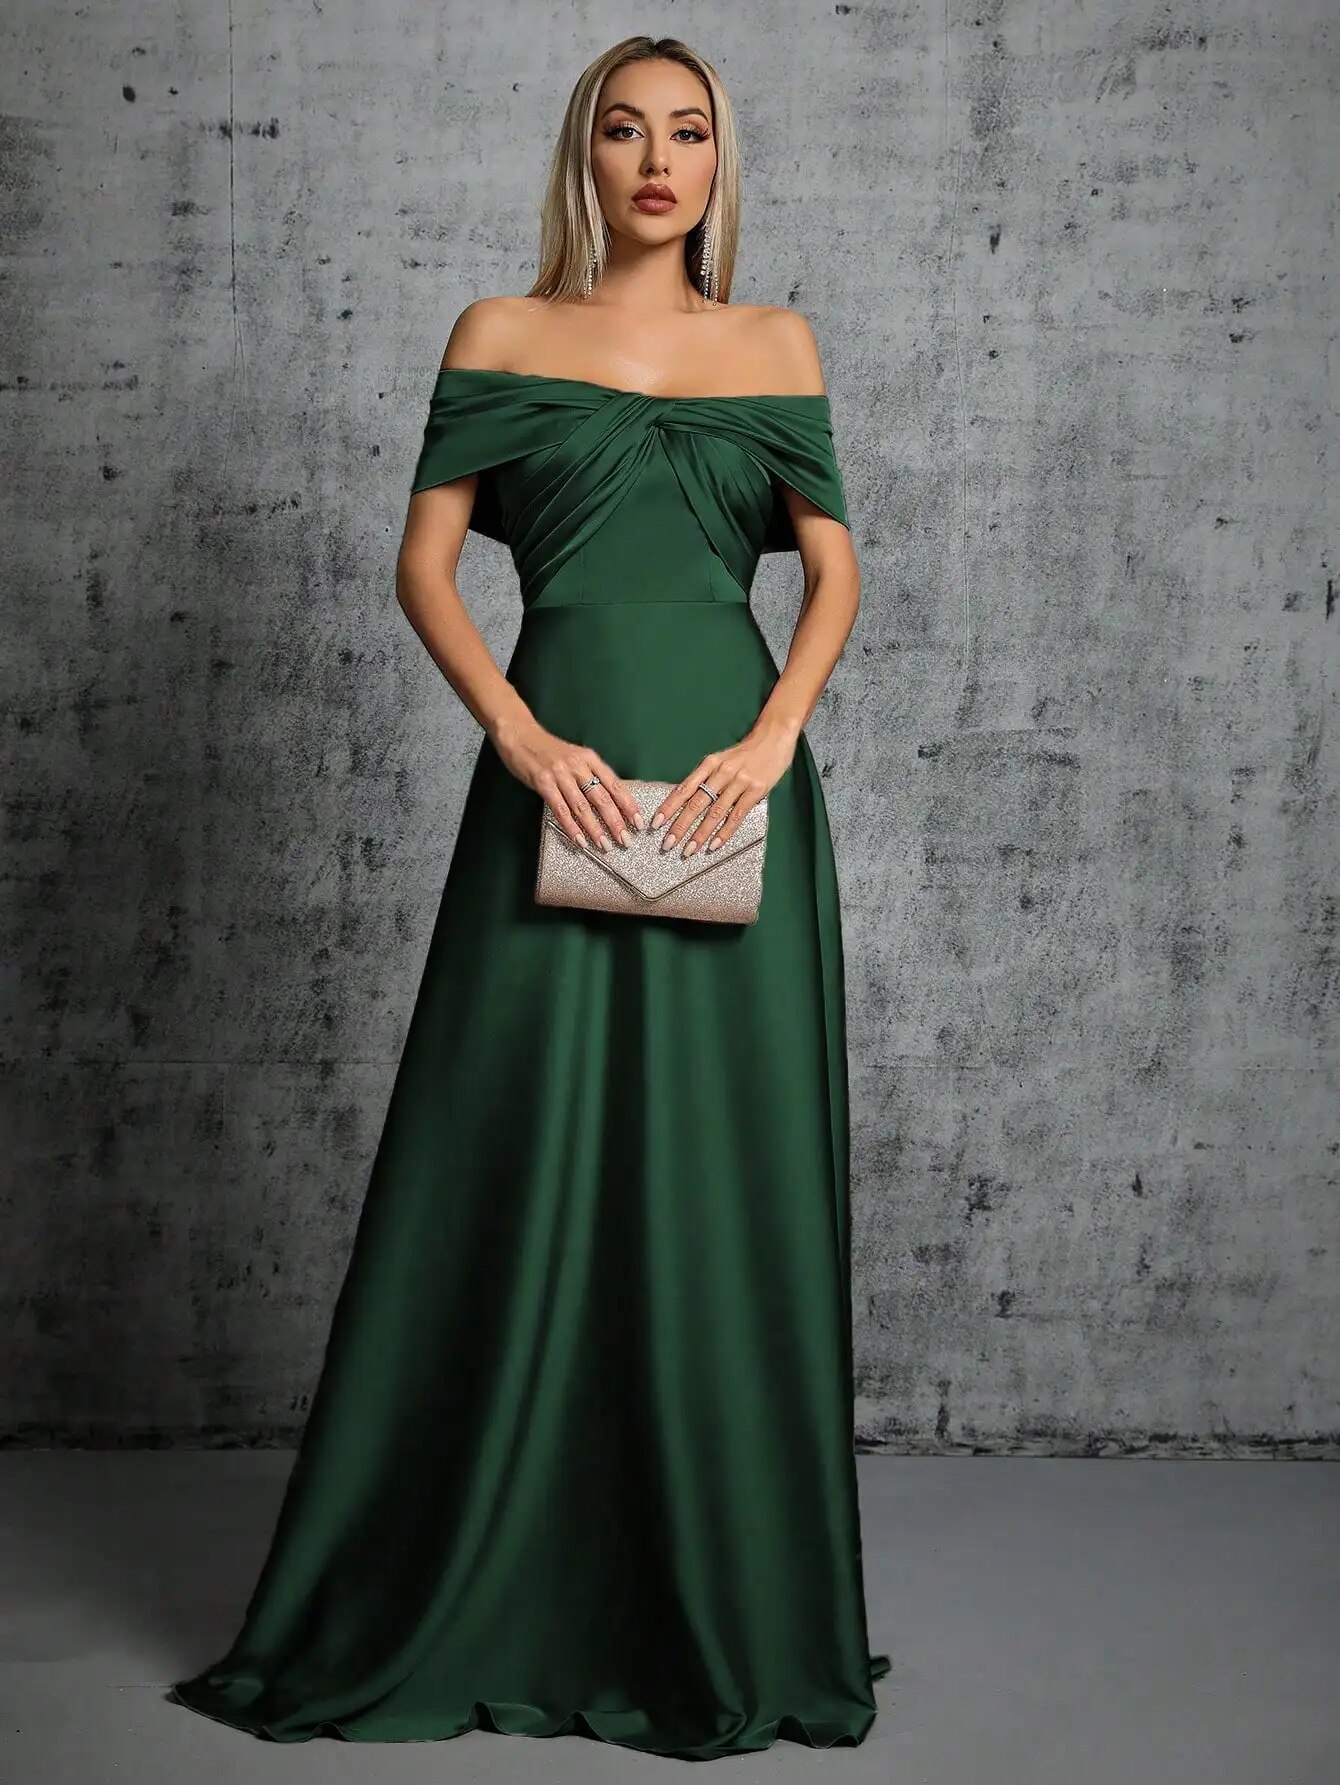 come4buy.com-Irregular Cross Pleated Satin Gown Ball Dress Party Dress